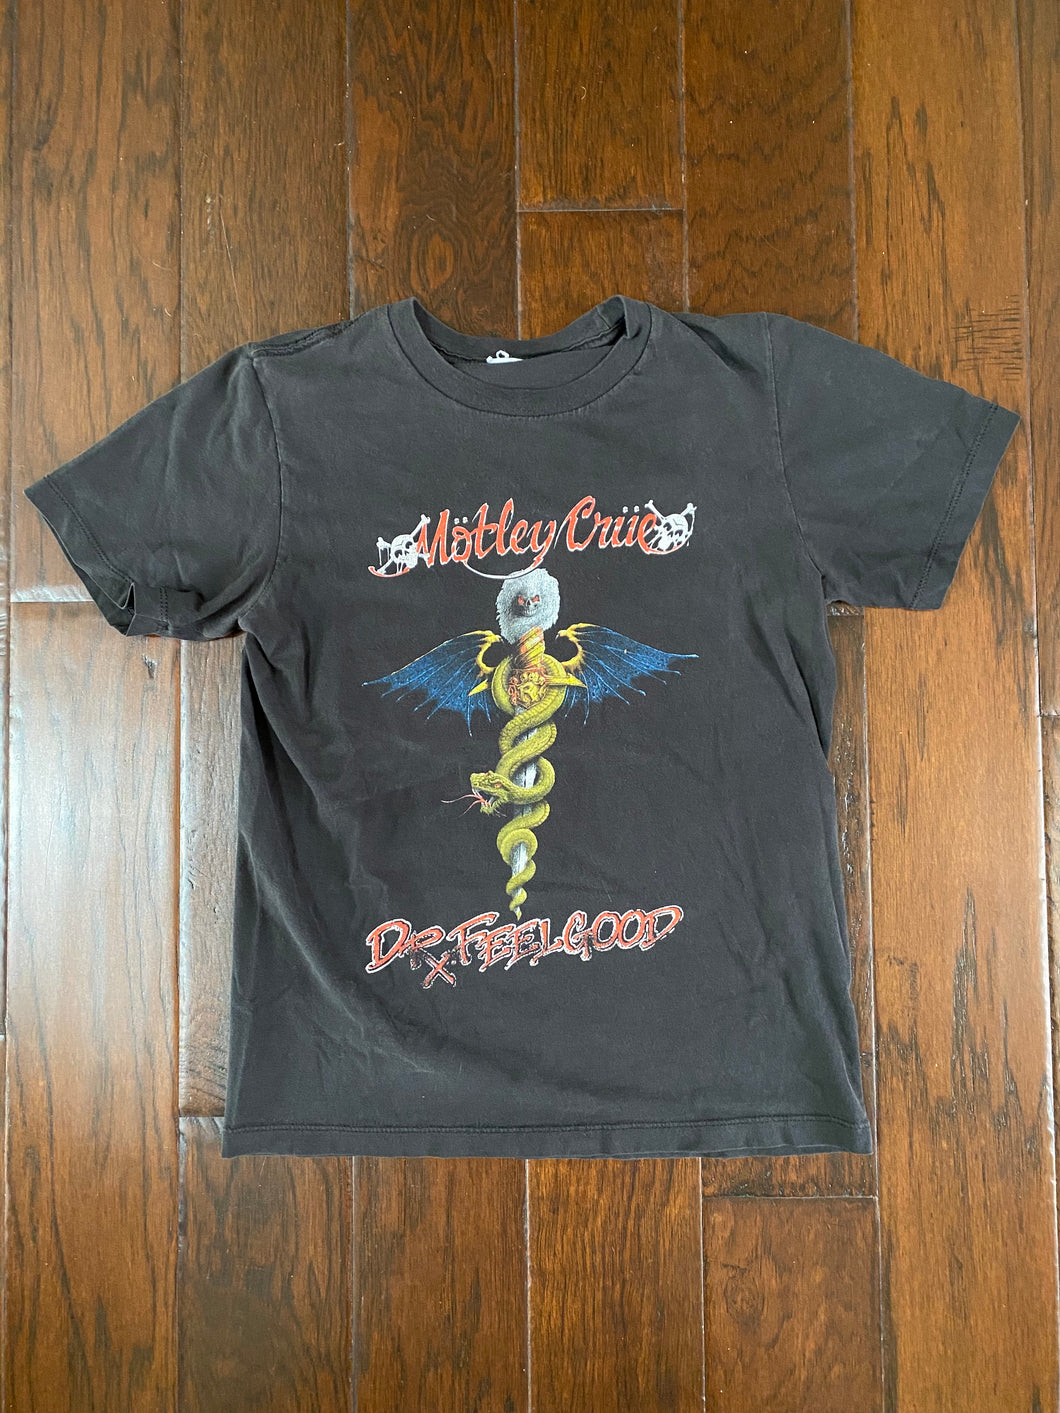 Motley Crue 2000’s “Dr. Feelgood” Vintage Distressed T-shirt